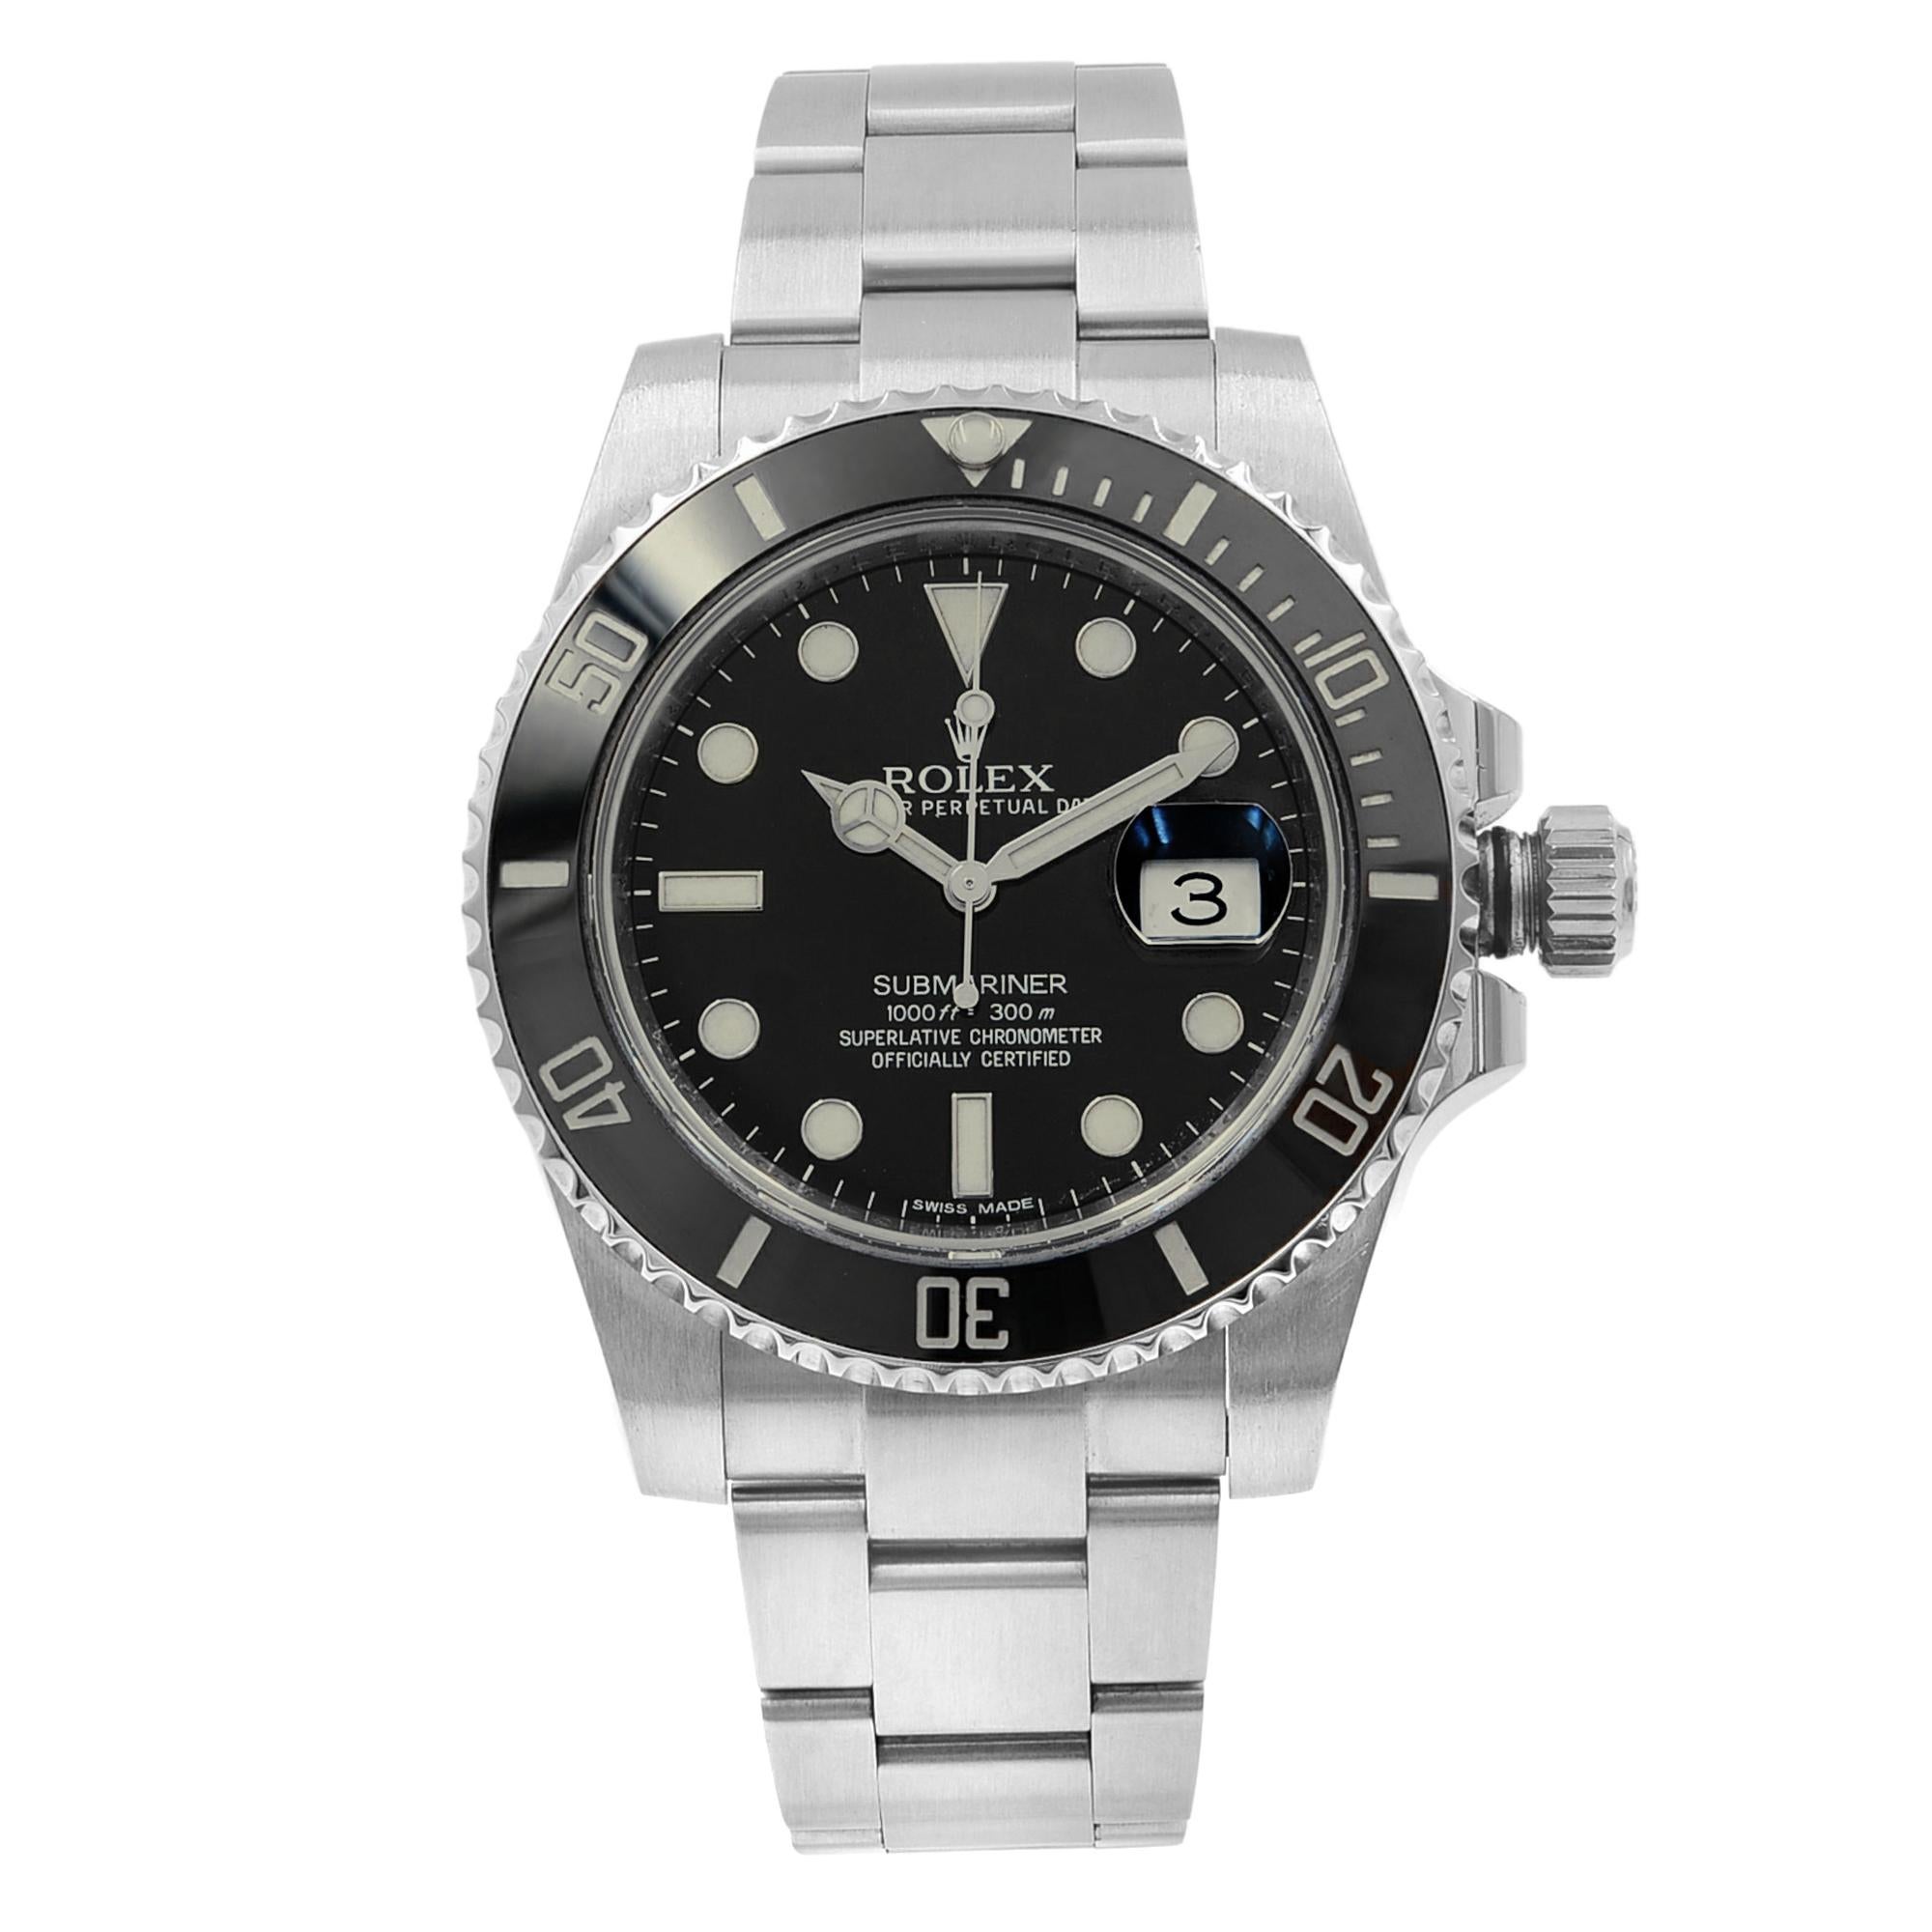 This pre-owned Rolex Submariner 116610LN is a beautiful men's timepiece that is powered by mechanical (automatic) movement which is cased in a stainless steel case. It has a round shape face, date indicator dial and has hand sticks & dots style